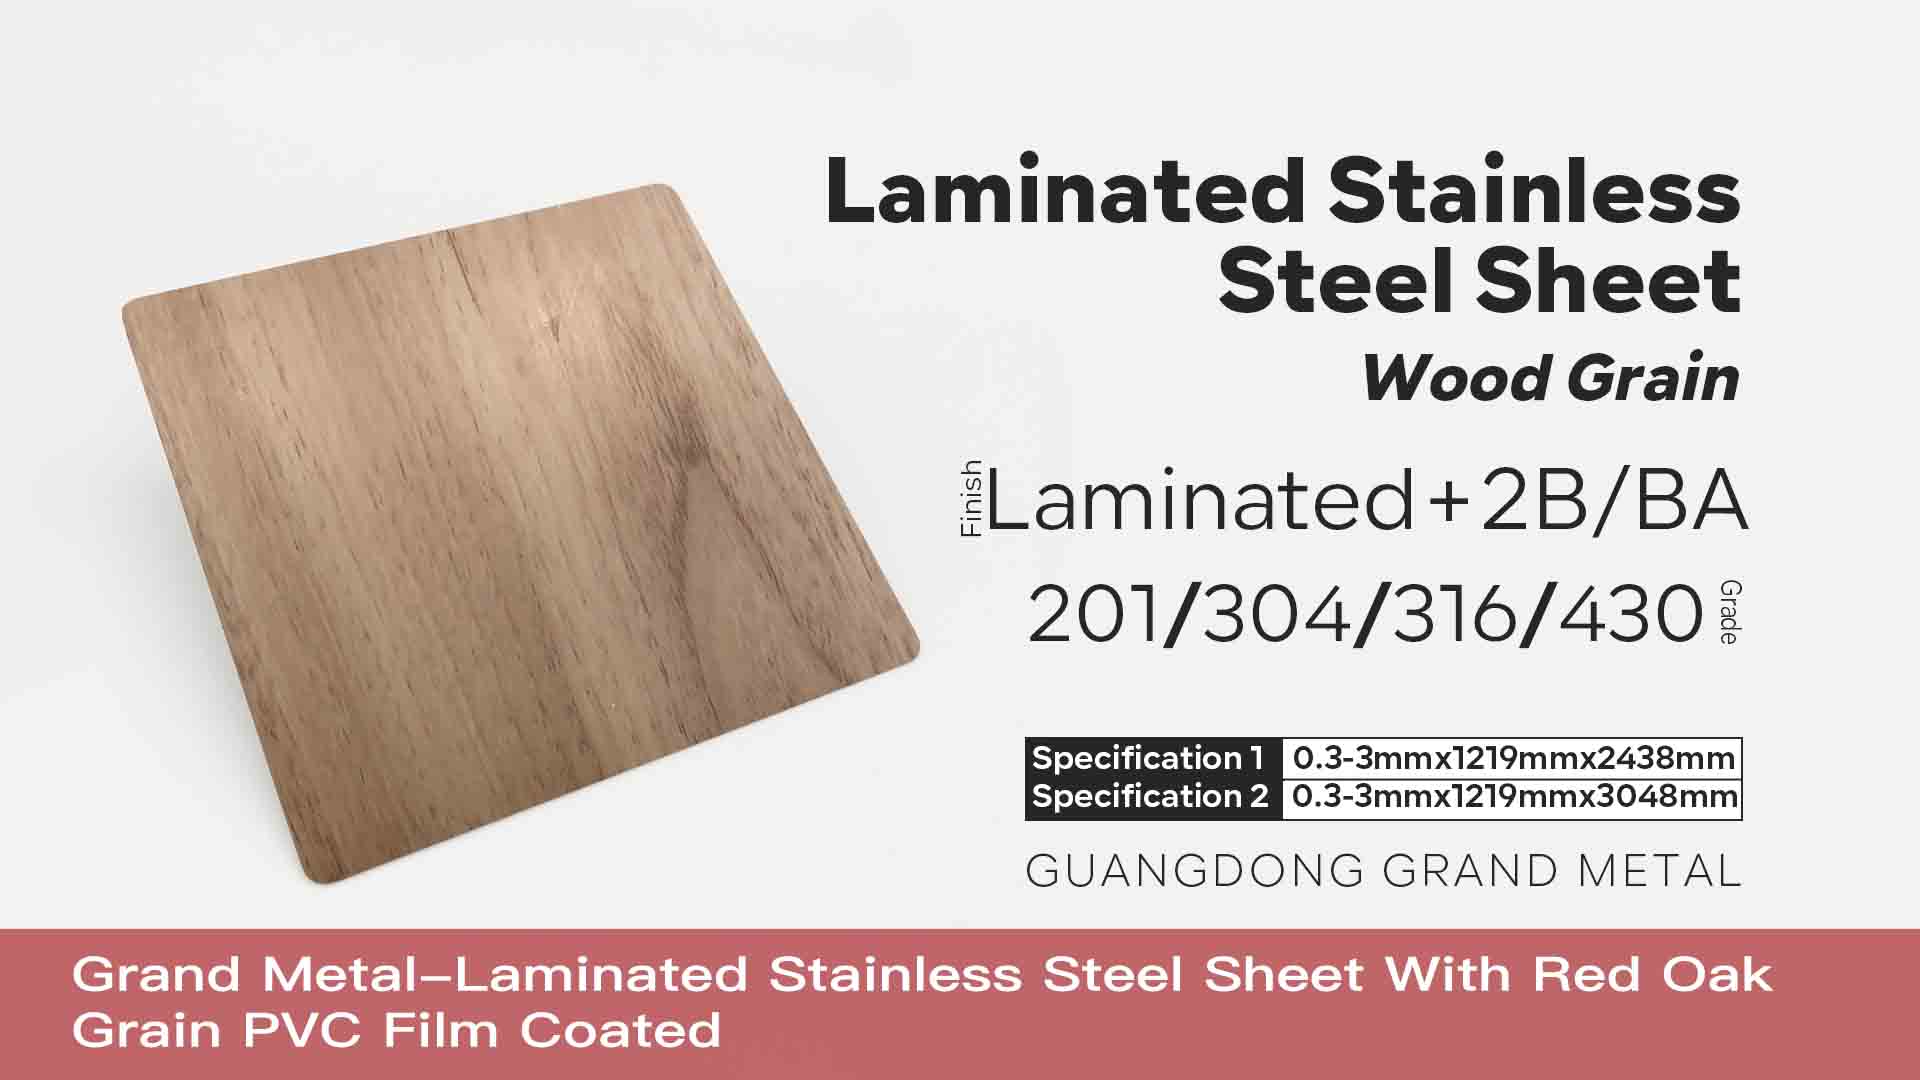 Laminated Stainless Steel Sheet With Red Oak Grain PVC Film Coated